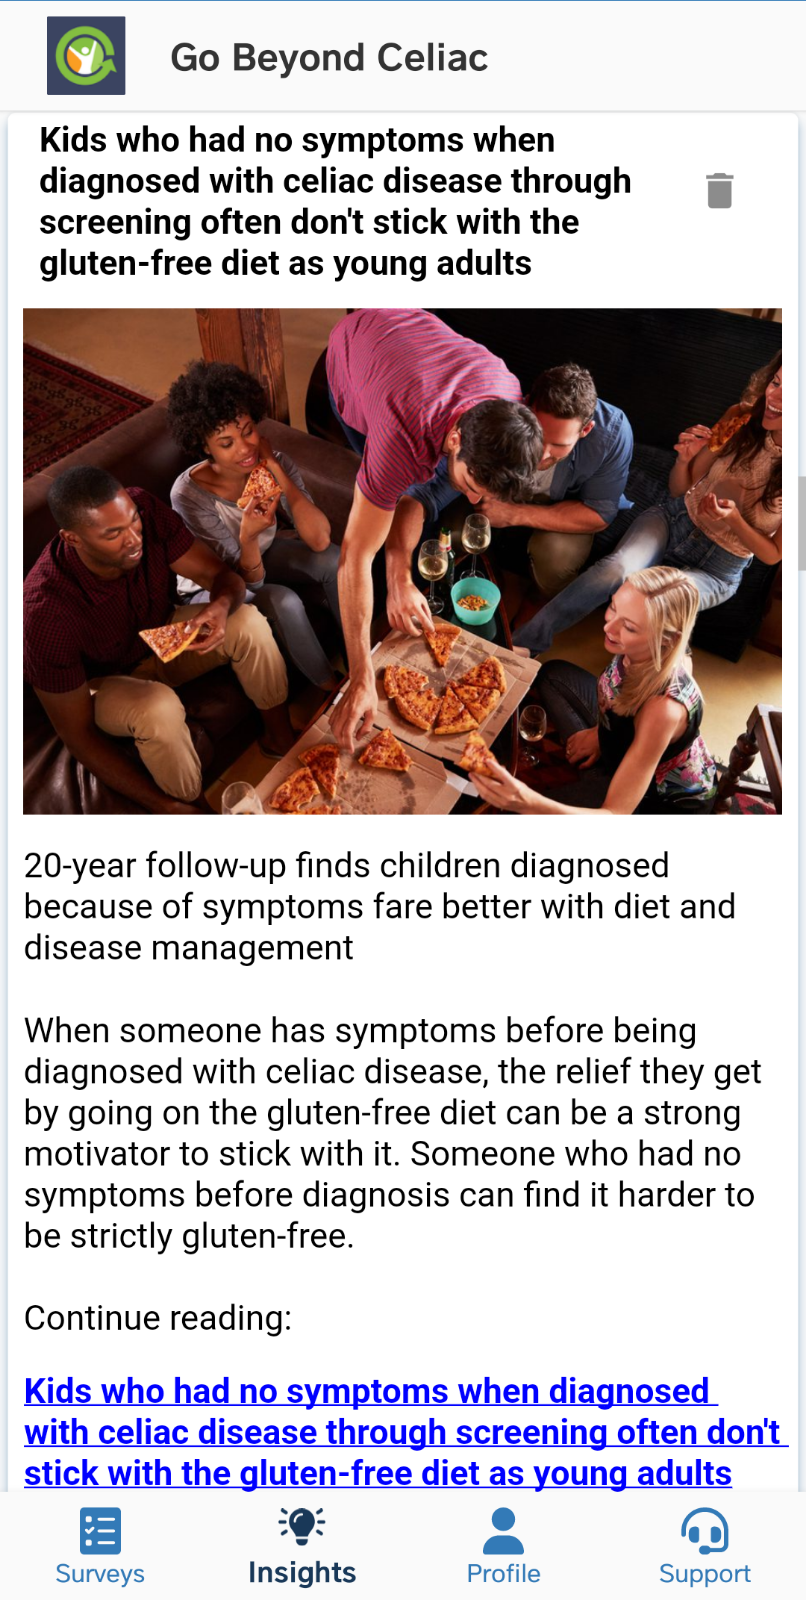 A screenshot of the Insights tab on the app, which showcases relevant research articles and results from the studies. This article featured is titled, "Kids who had no symptoms when diagnosed with celiac disease through screening often don't stick with the gluten-free diet as young adults."